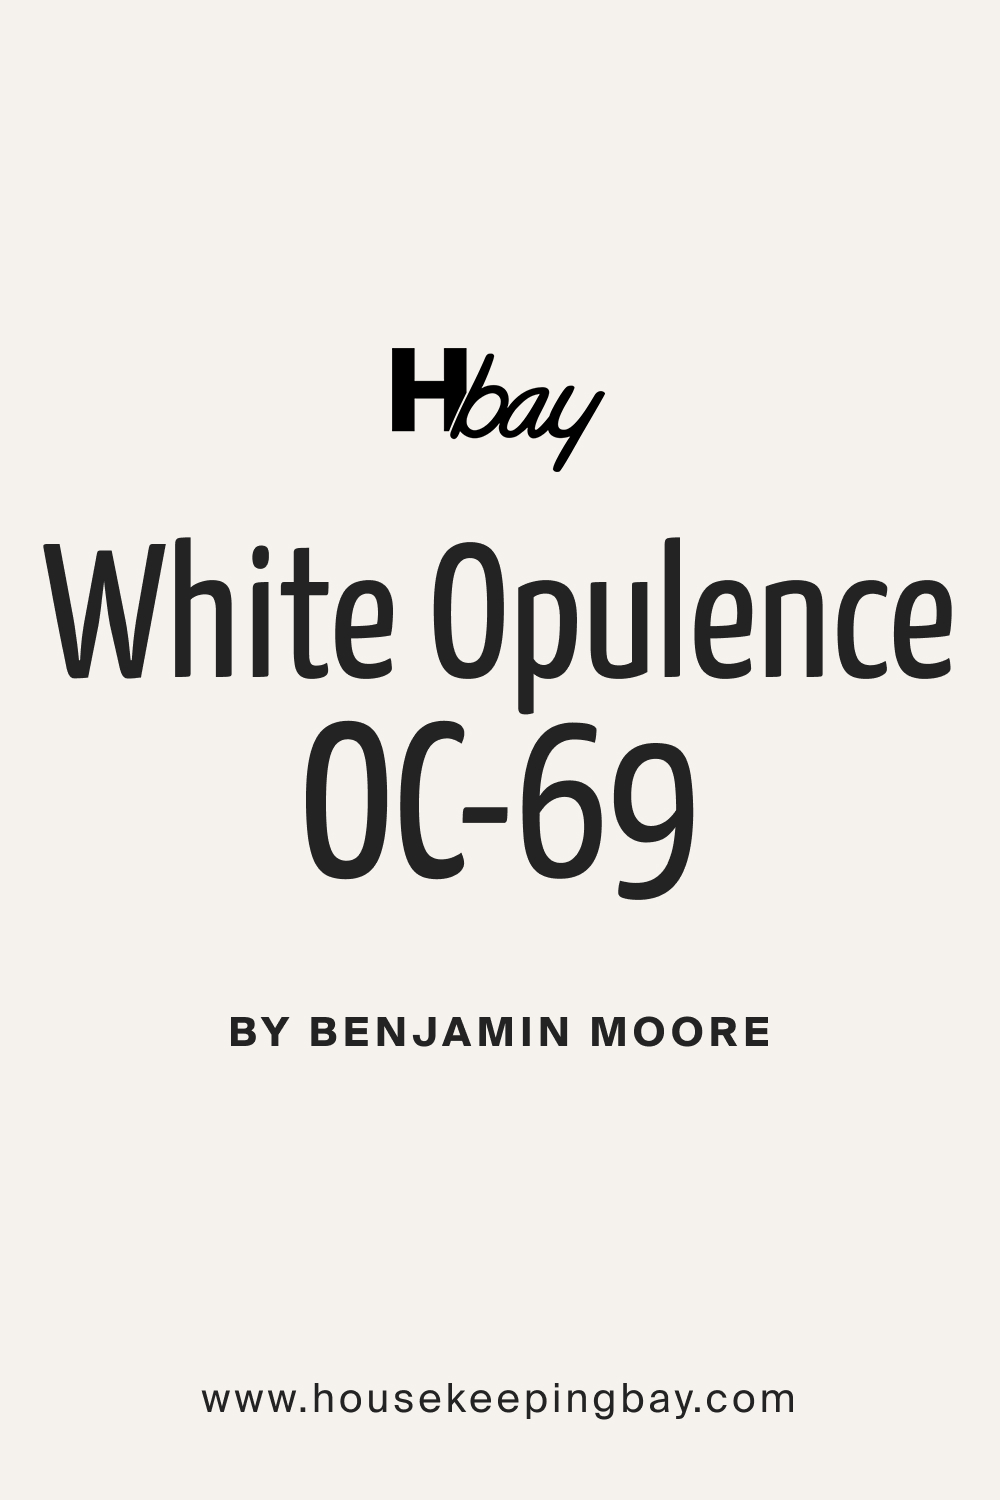 White Opulence OC 69 Paint Color by Benjamin Moore